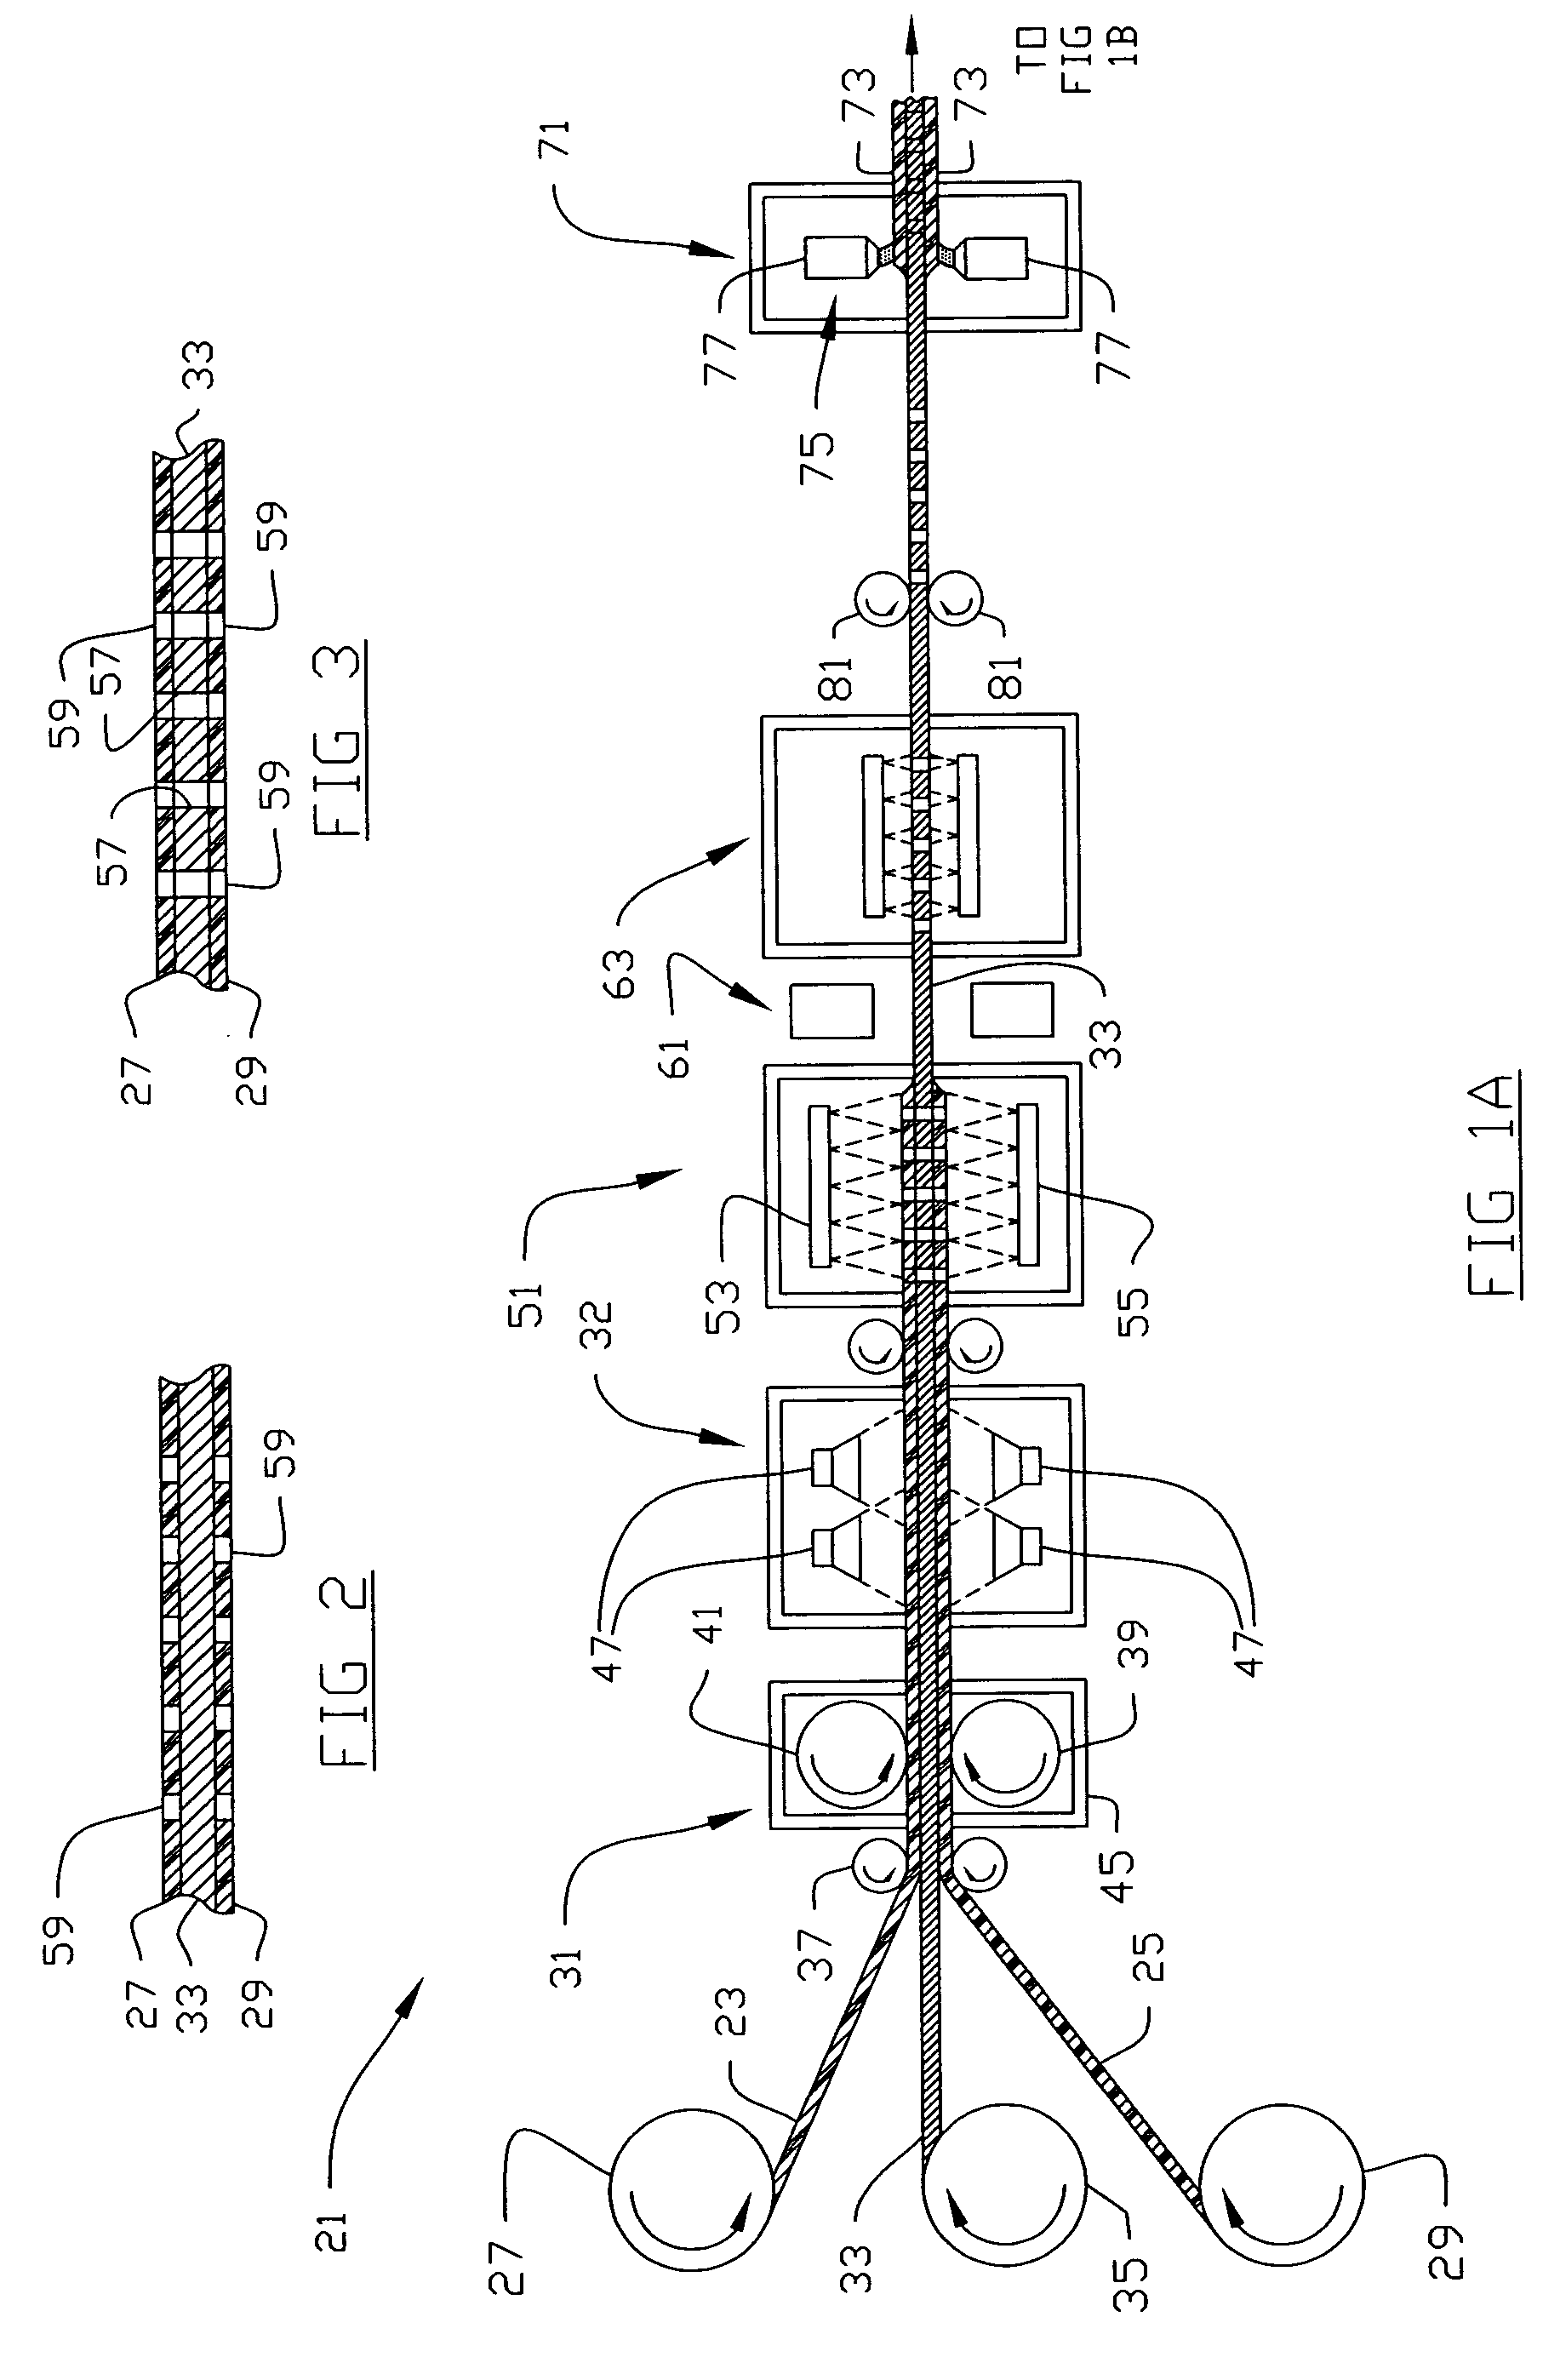 Apparatus and method for making circuitized substrates having photo-imageable dielectric layers in a continuous manner